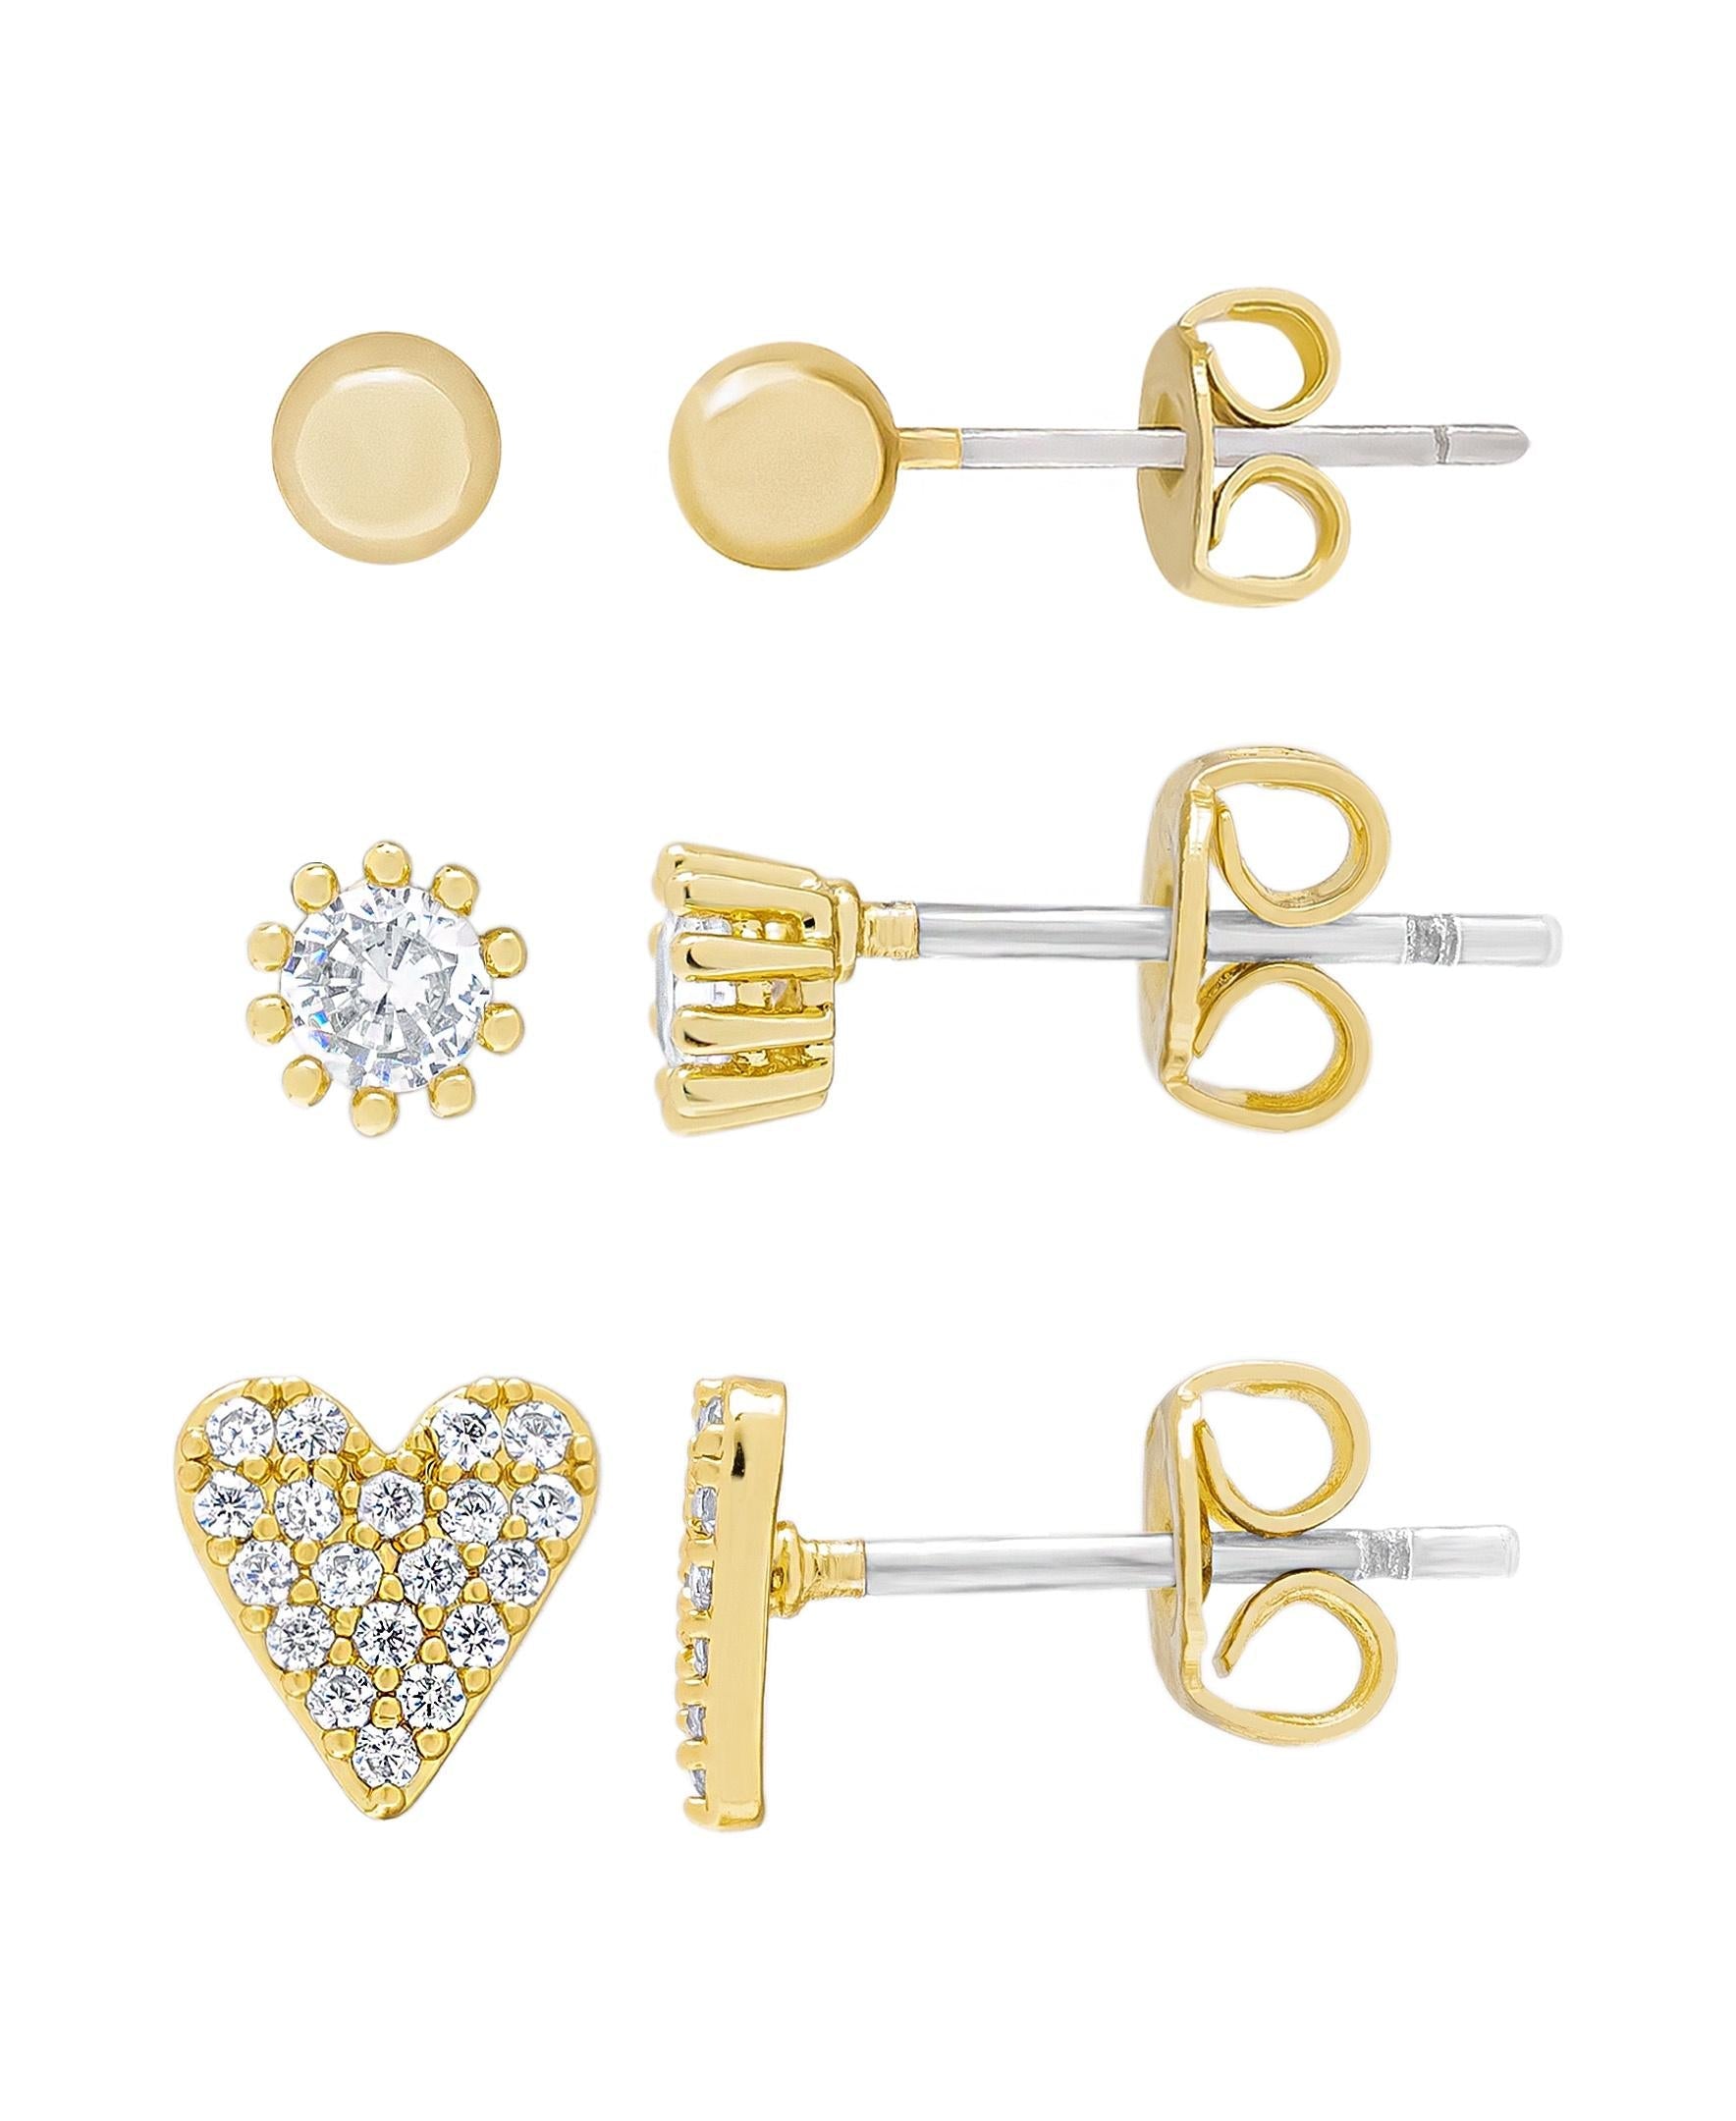 Gold Plated Rnd Cubic Zirconia, Pave Heart & Ball Stud 3PC Stud Set Earrings